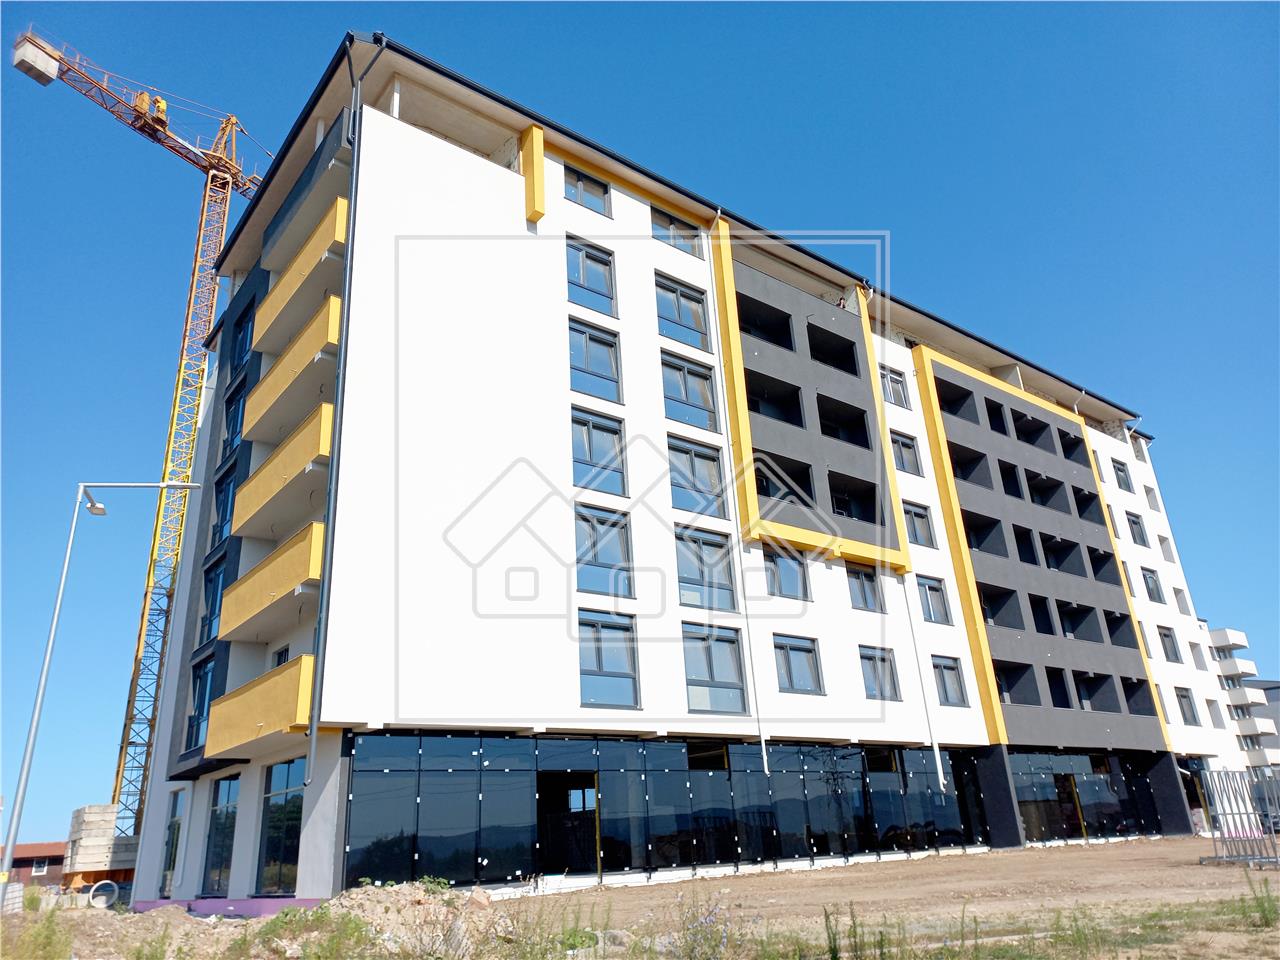 Apartment for sale in Alba Iulia - Sebes - 3 rooms and a balcony - New